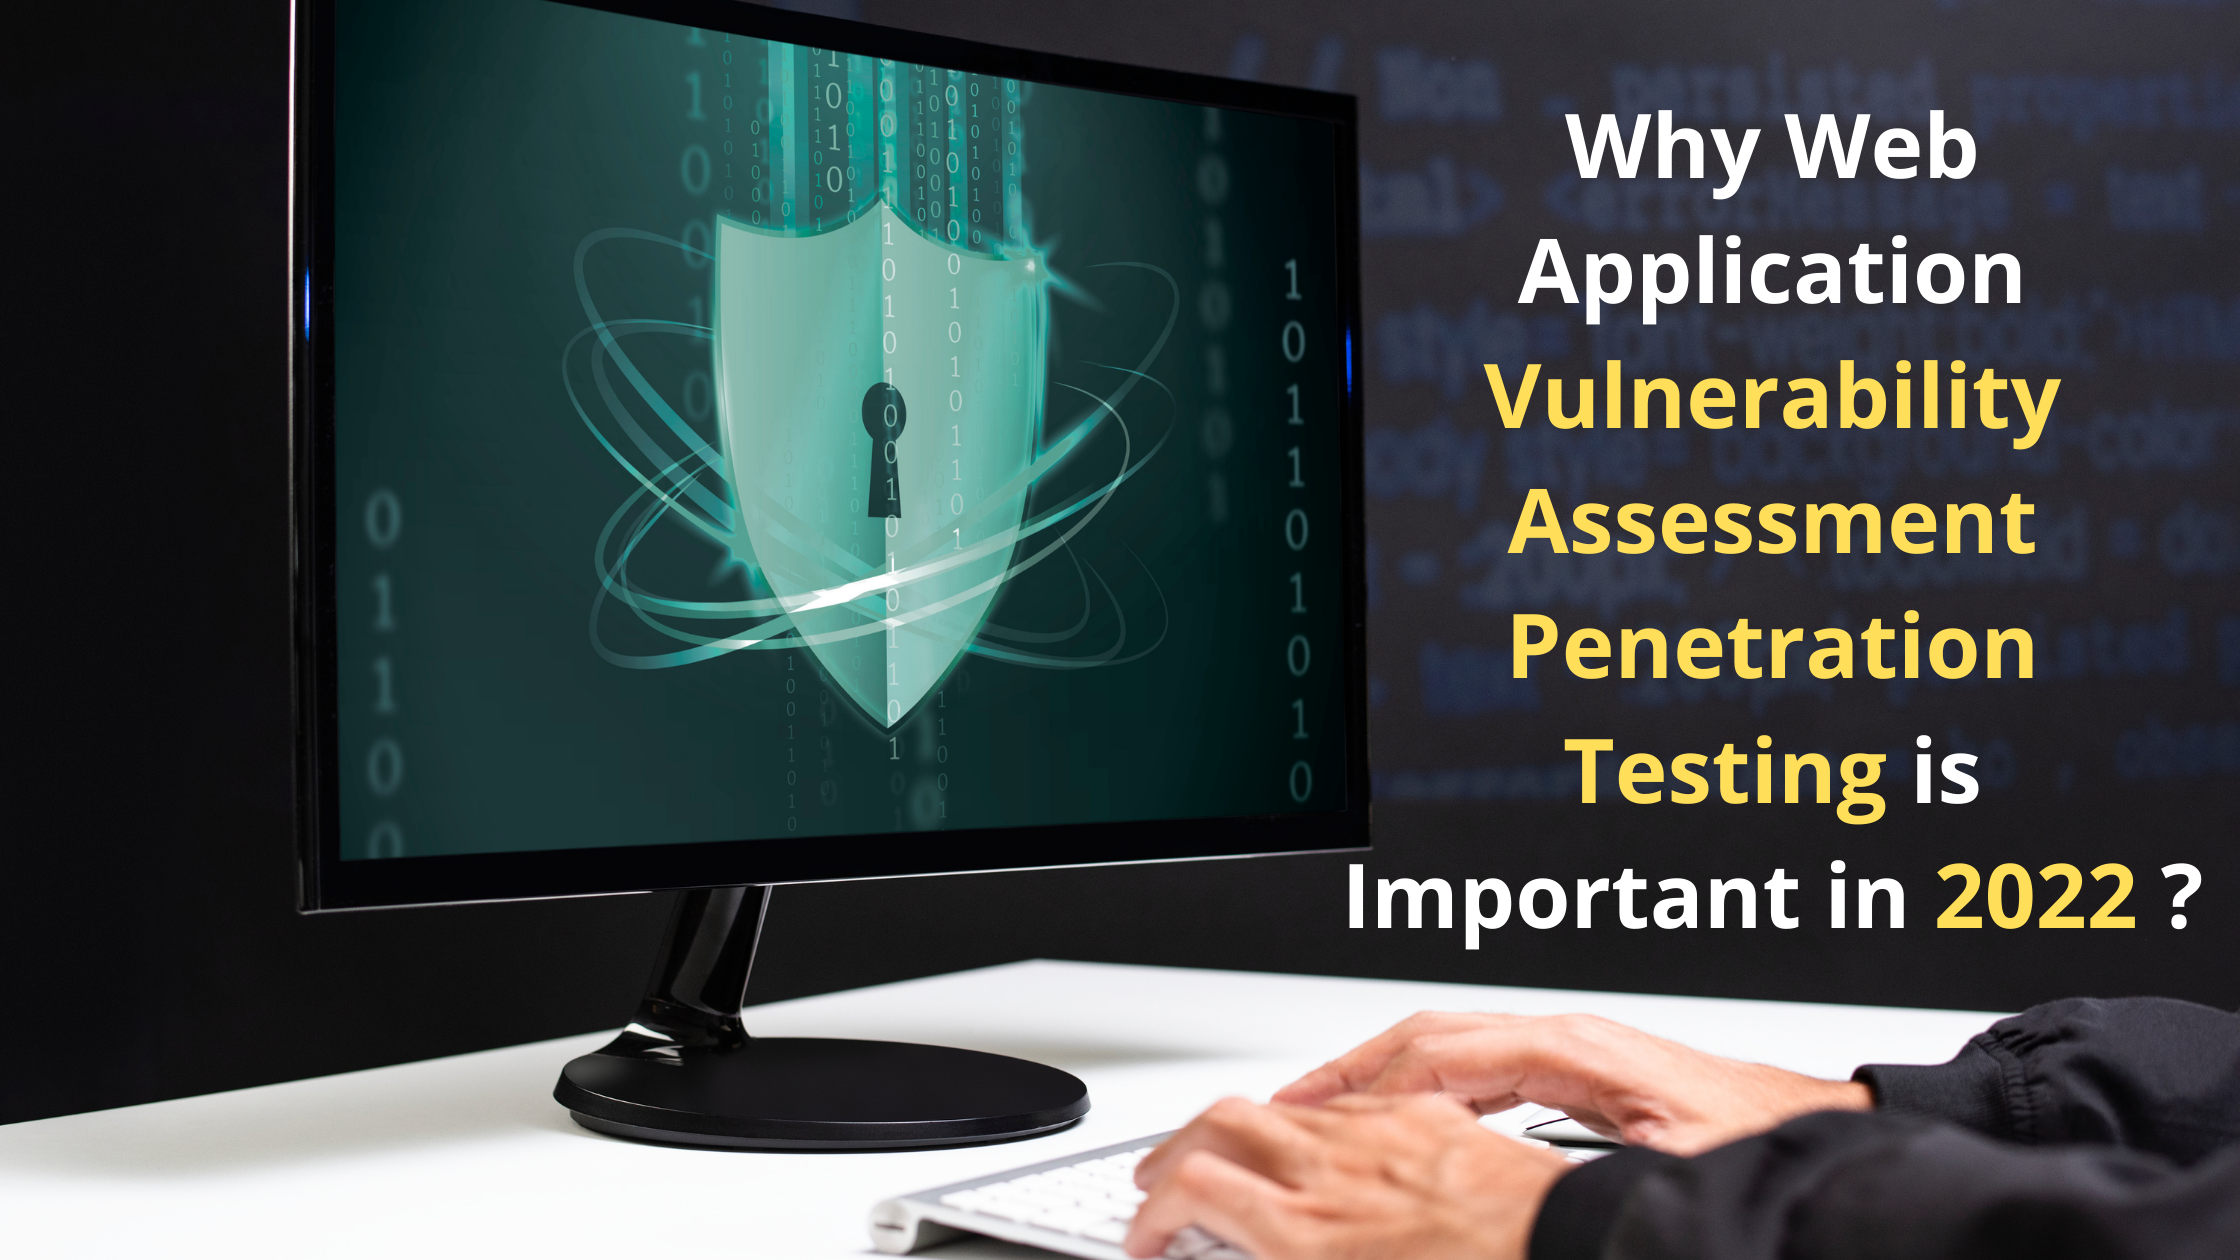 Why Web Application Vulnerability Assessment Penetration Testing is Important in 2022